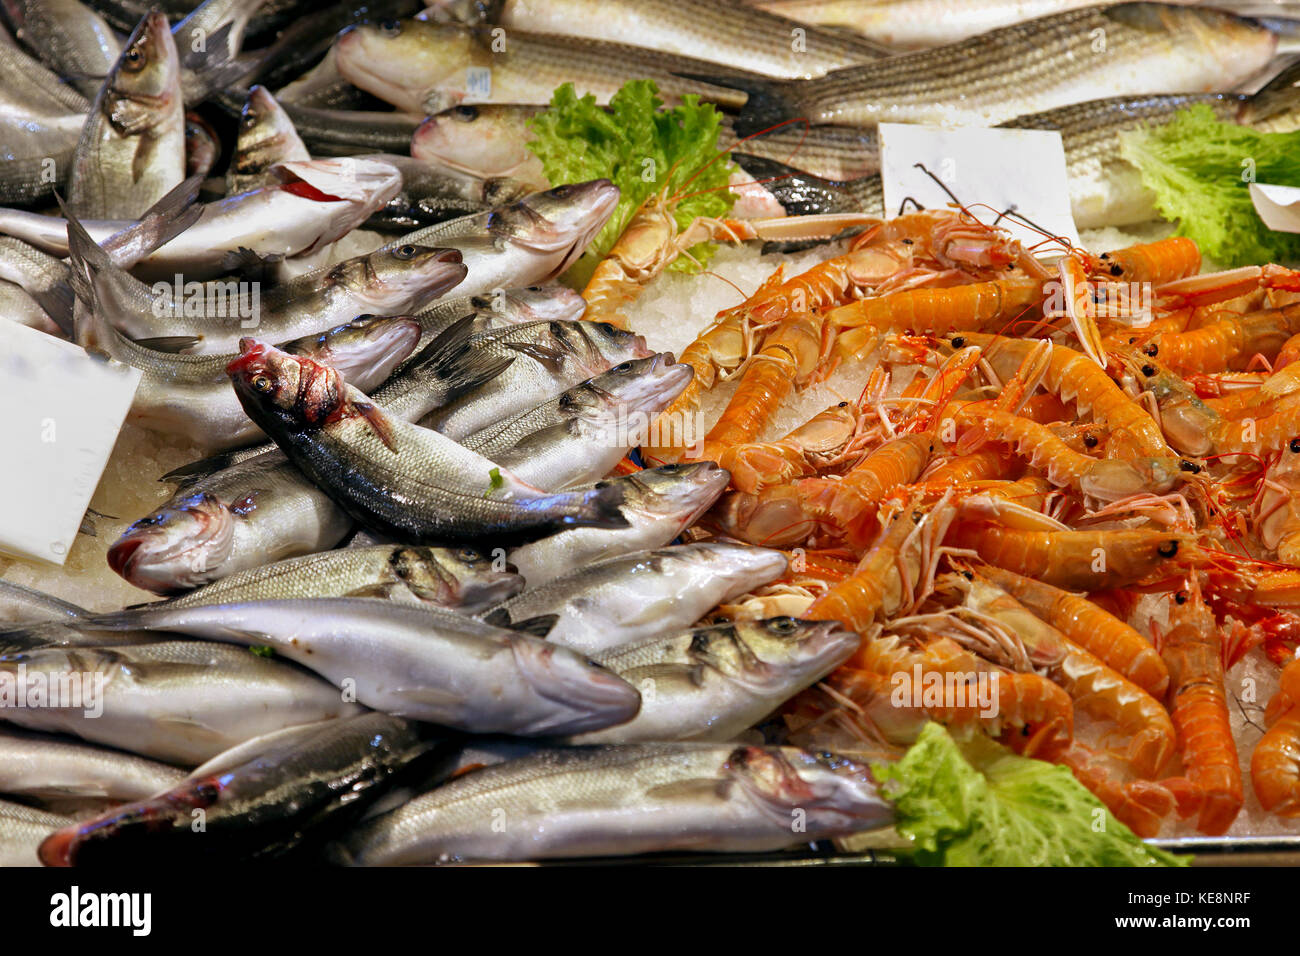 Fish and shrimp pile sold on market stall Stock Photo